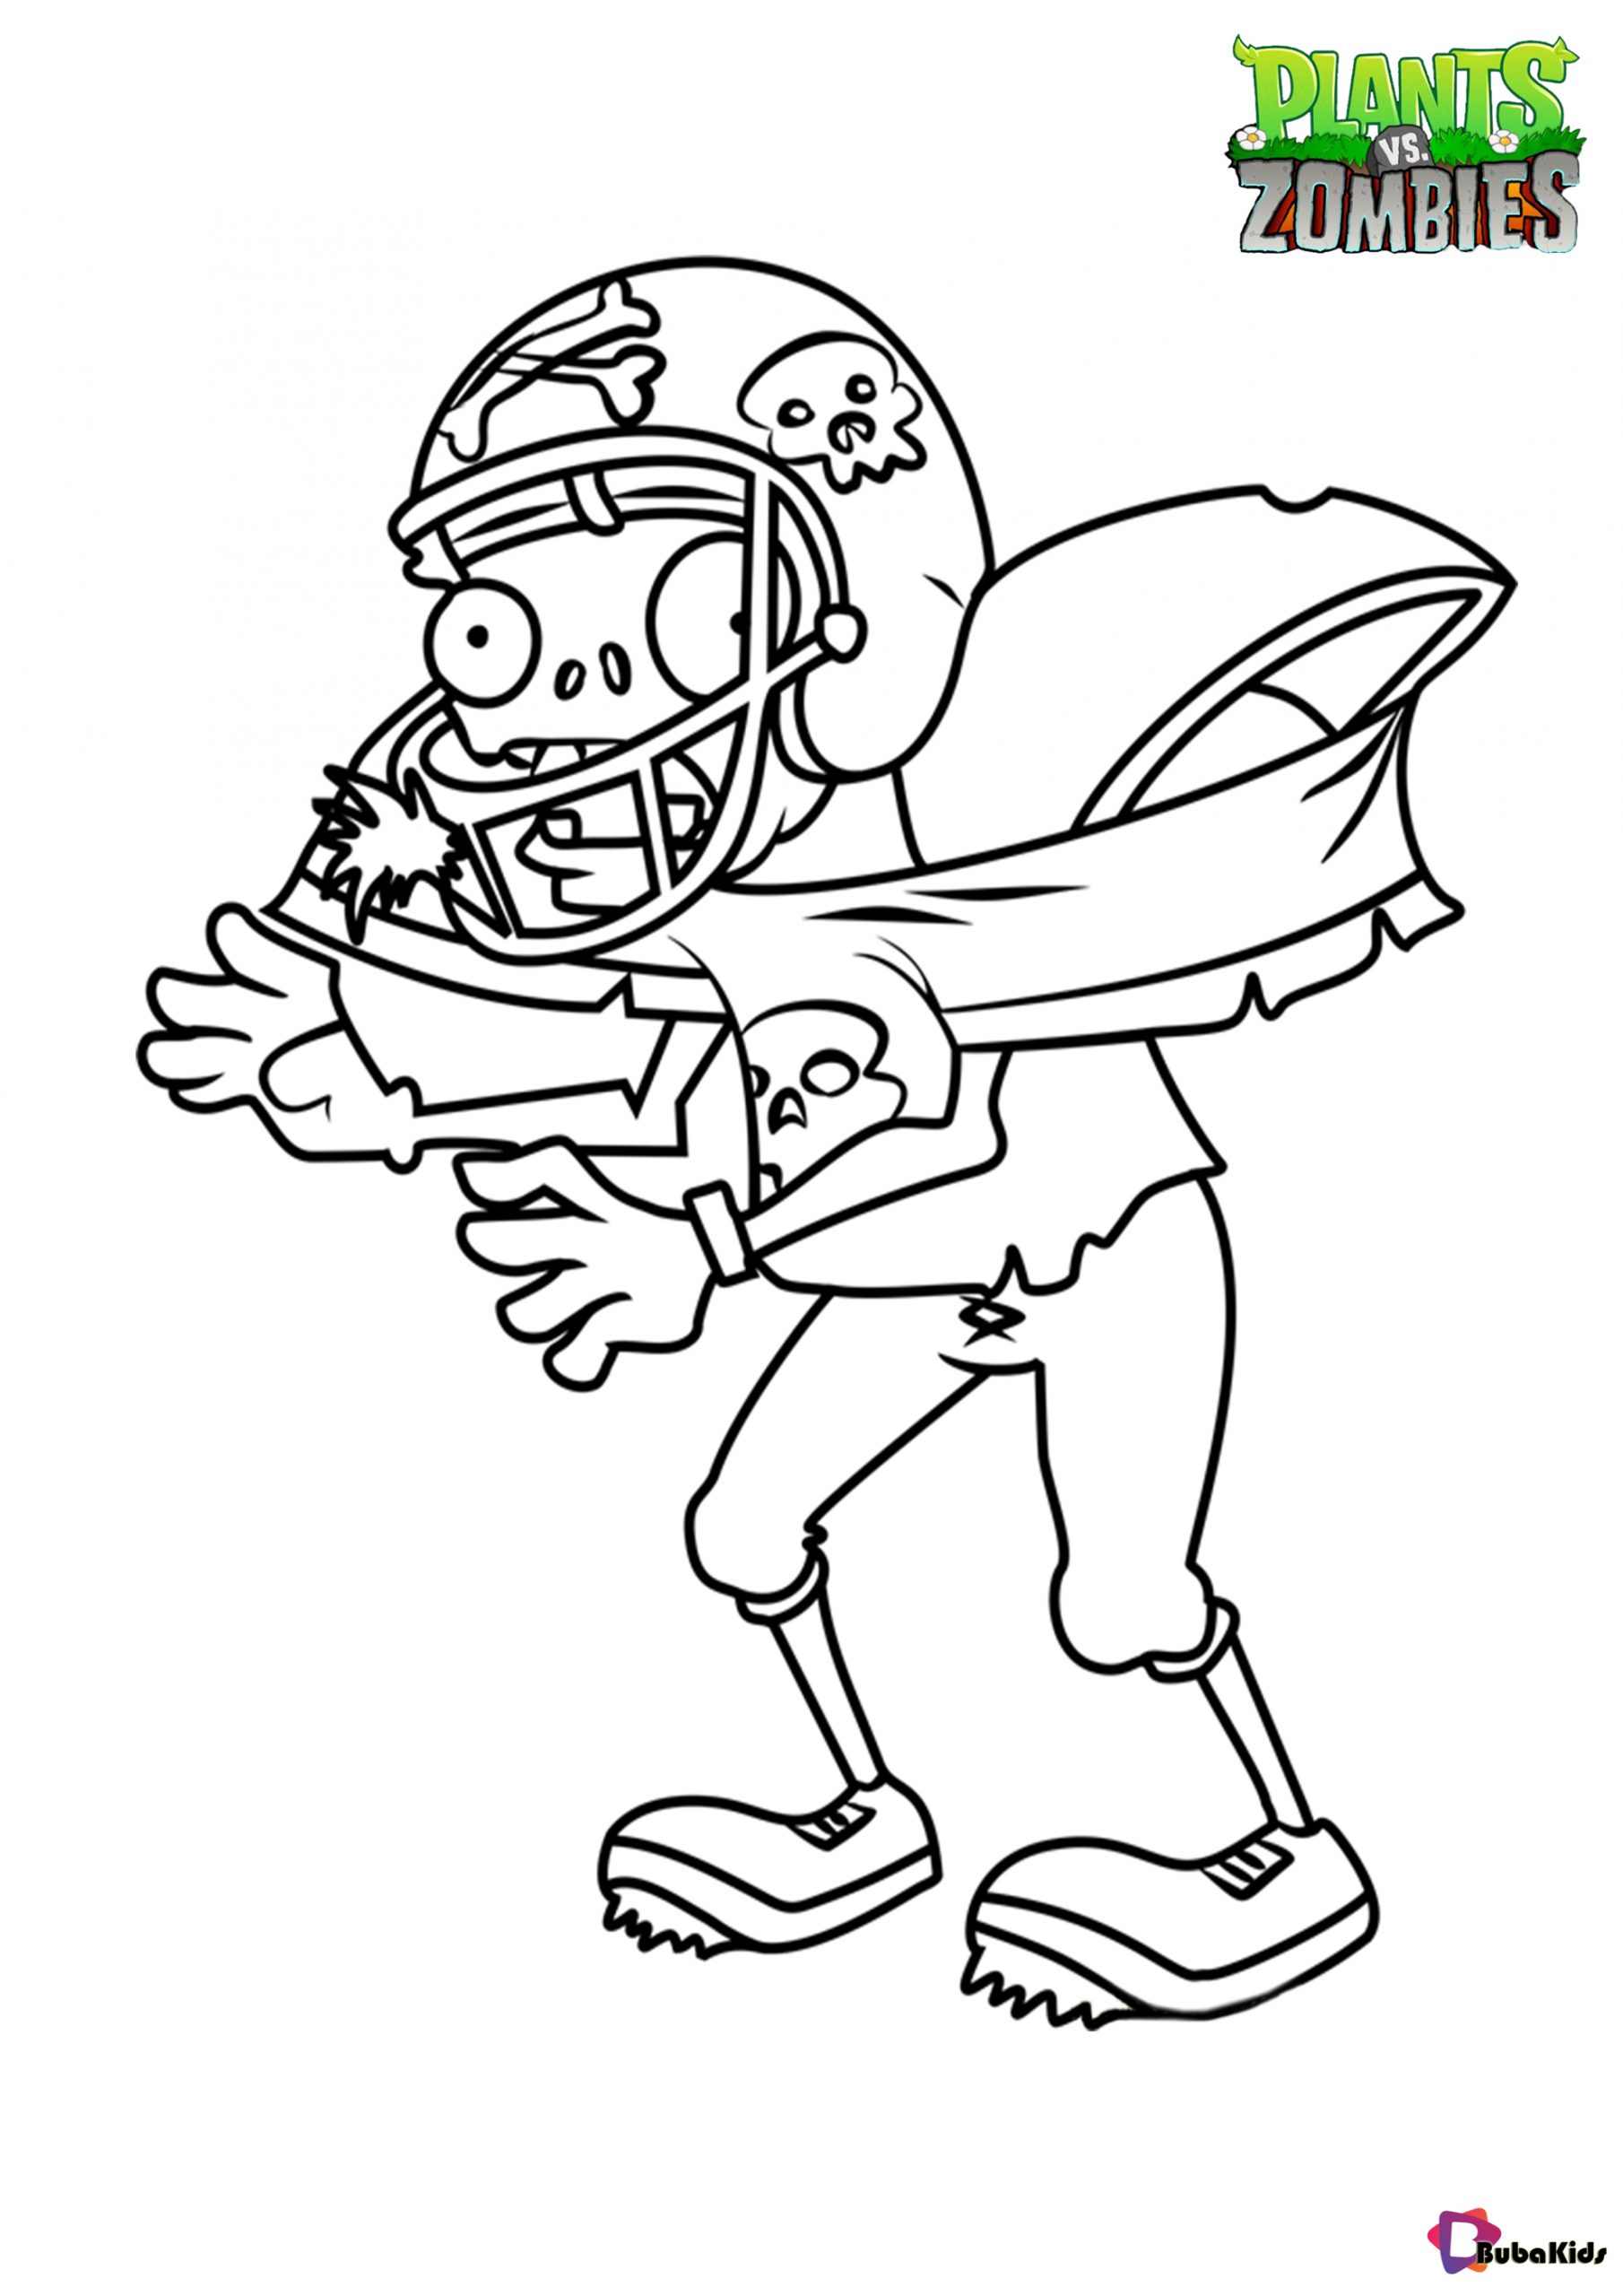 Plants vs zombies Football Zombie coloring page Wallpaper